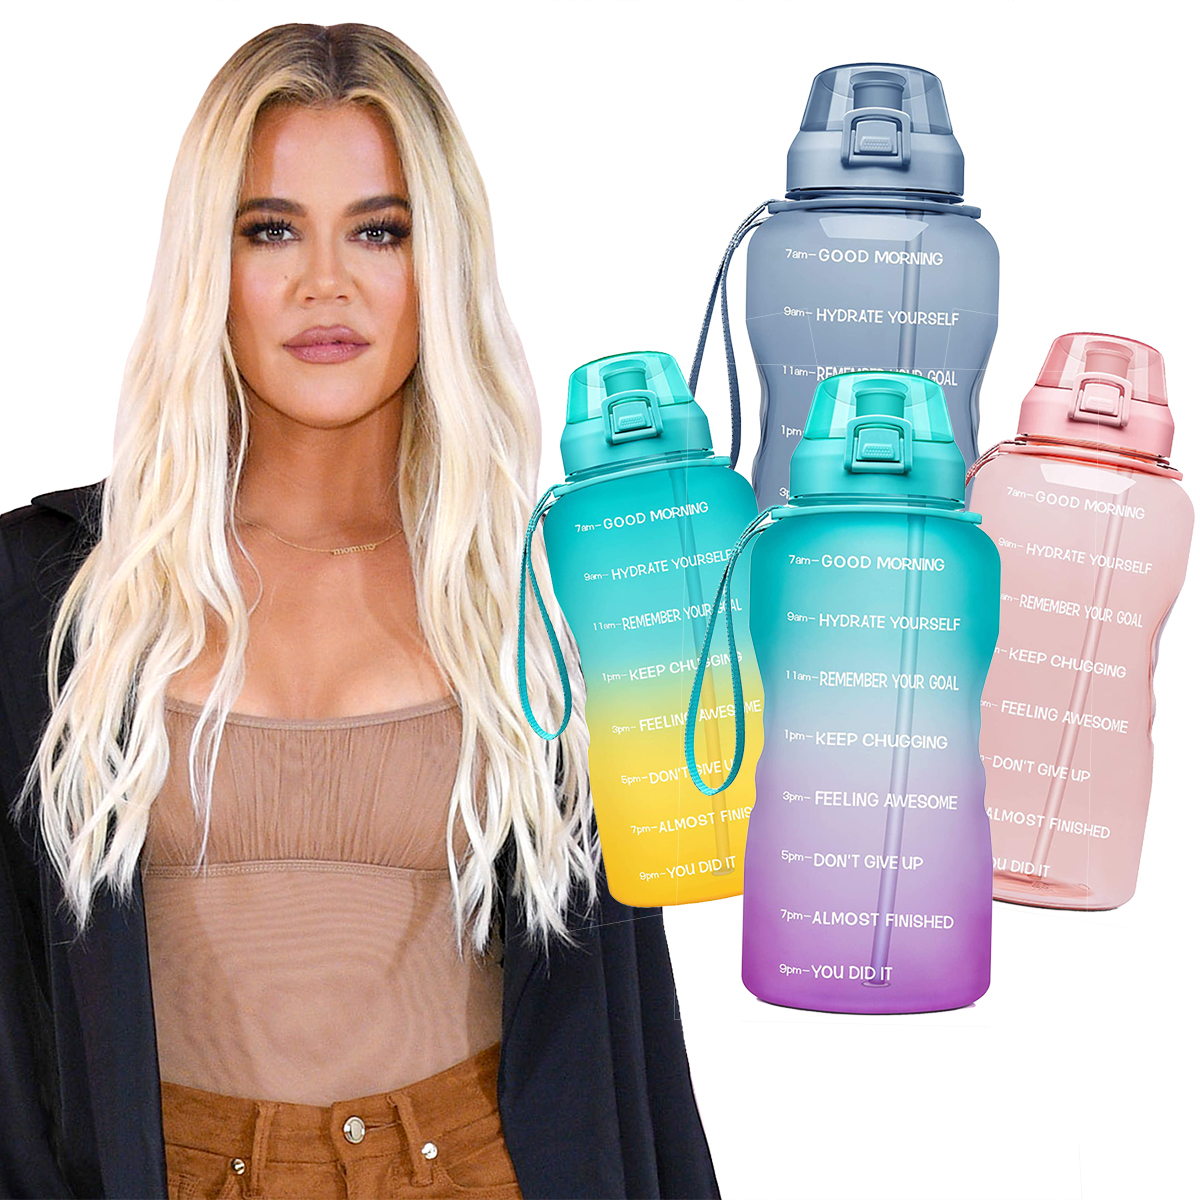 https://akns-images.eonline.com/eol_images/Entire_Site/2022024/rs_1200x1200-220124102235-1200-Ecomm-Khloe-Water-Bottle.jpg?fit=around%7C1080:540&output-quality=90&crop=1080:540;center,top